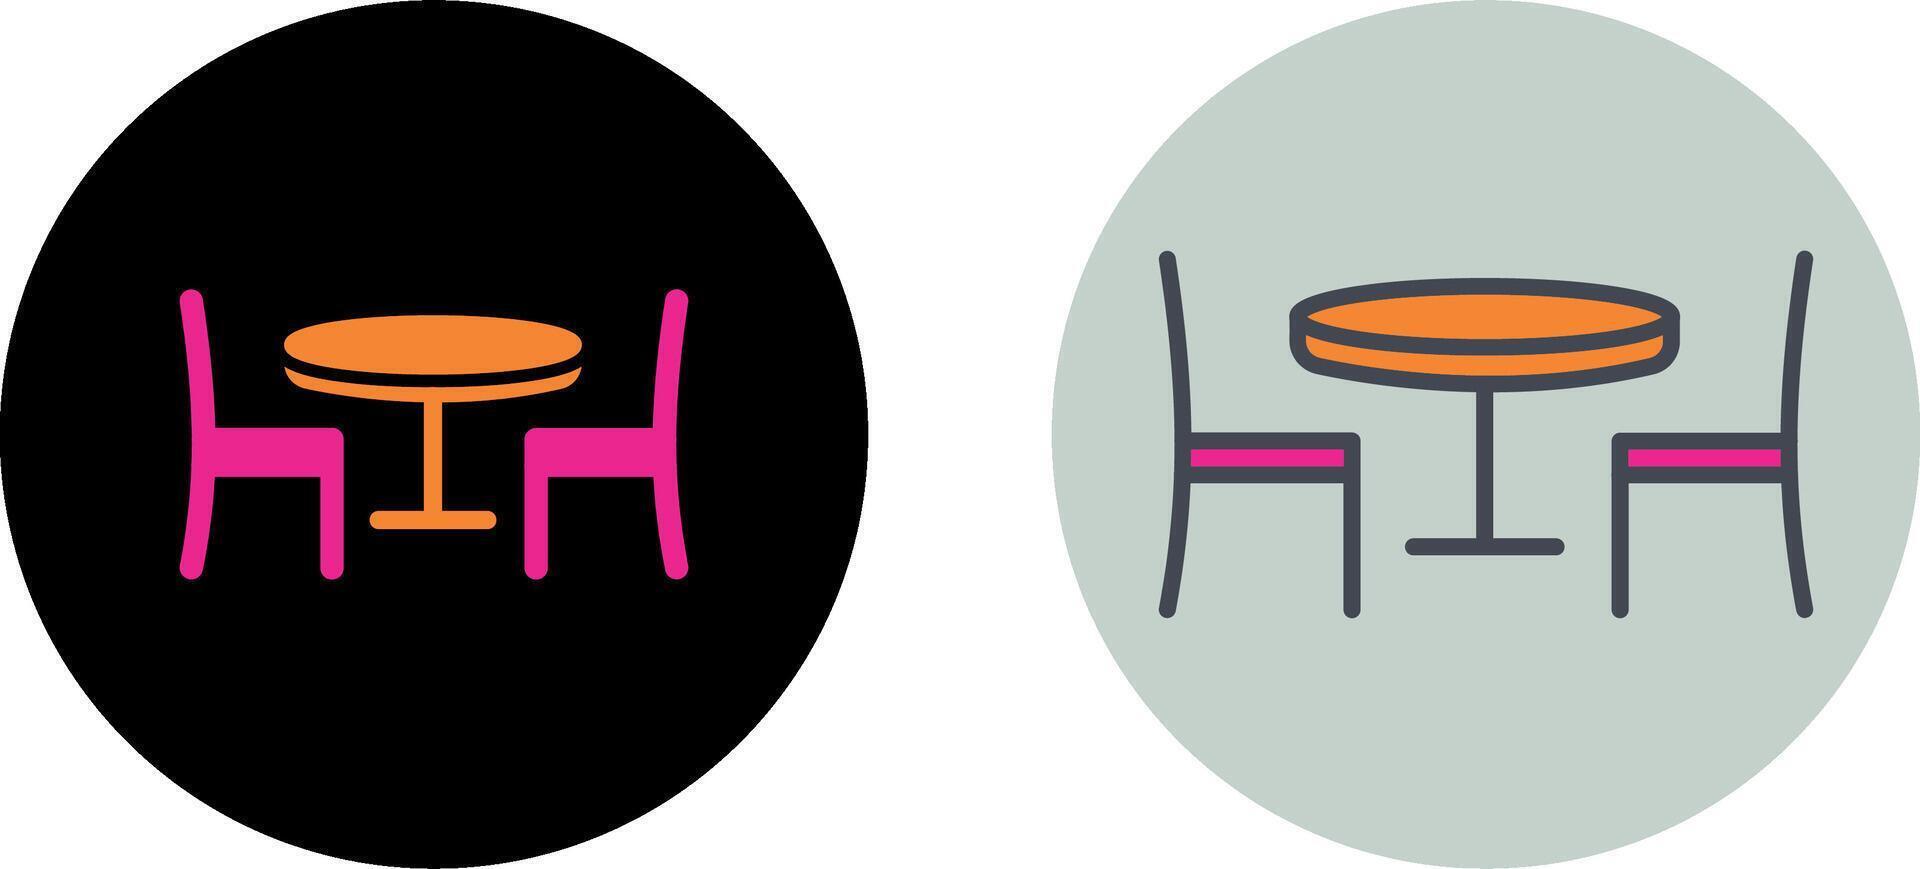 Dining Table Icon Design vector